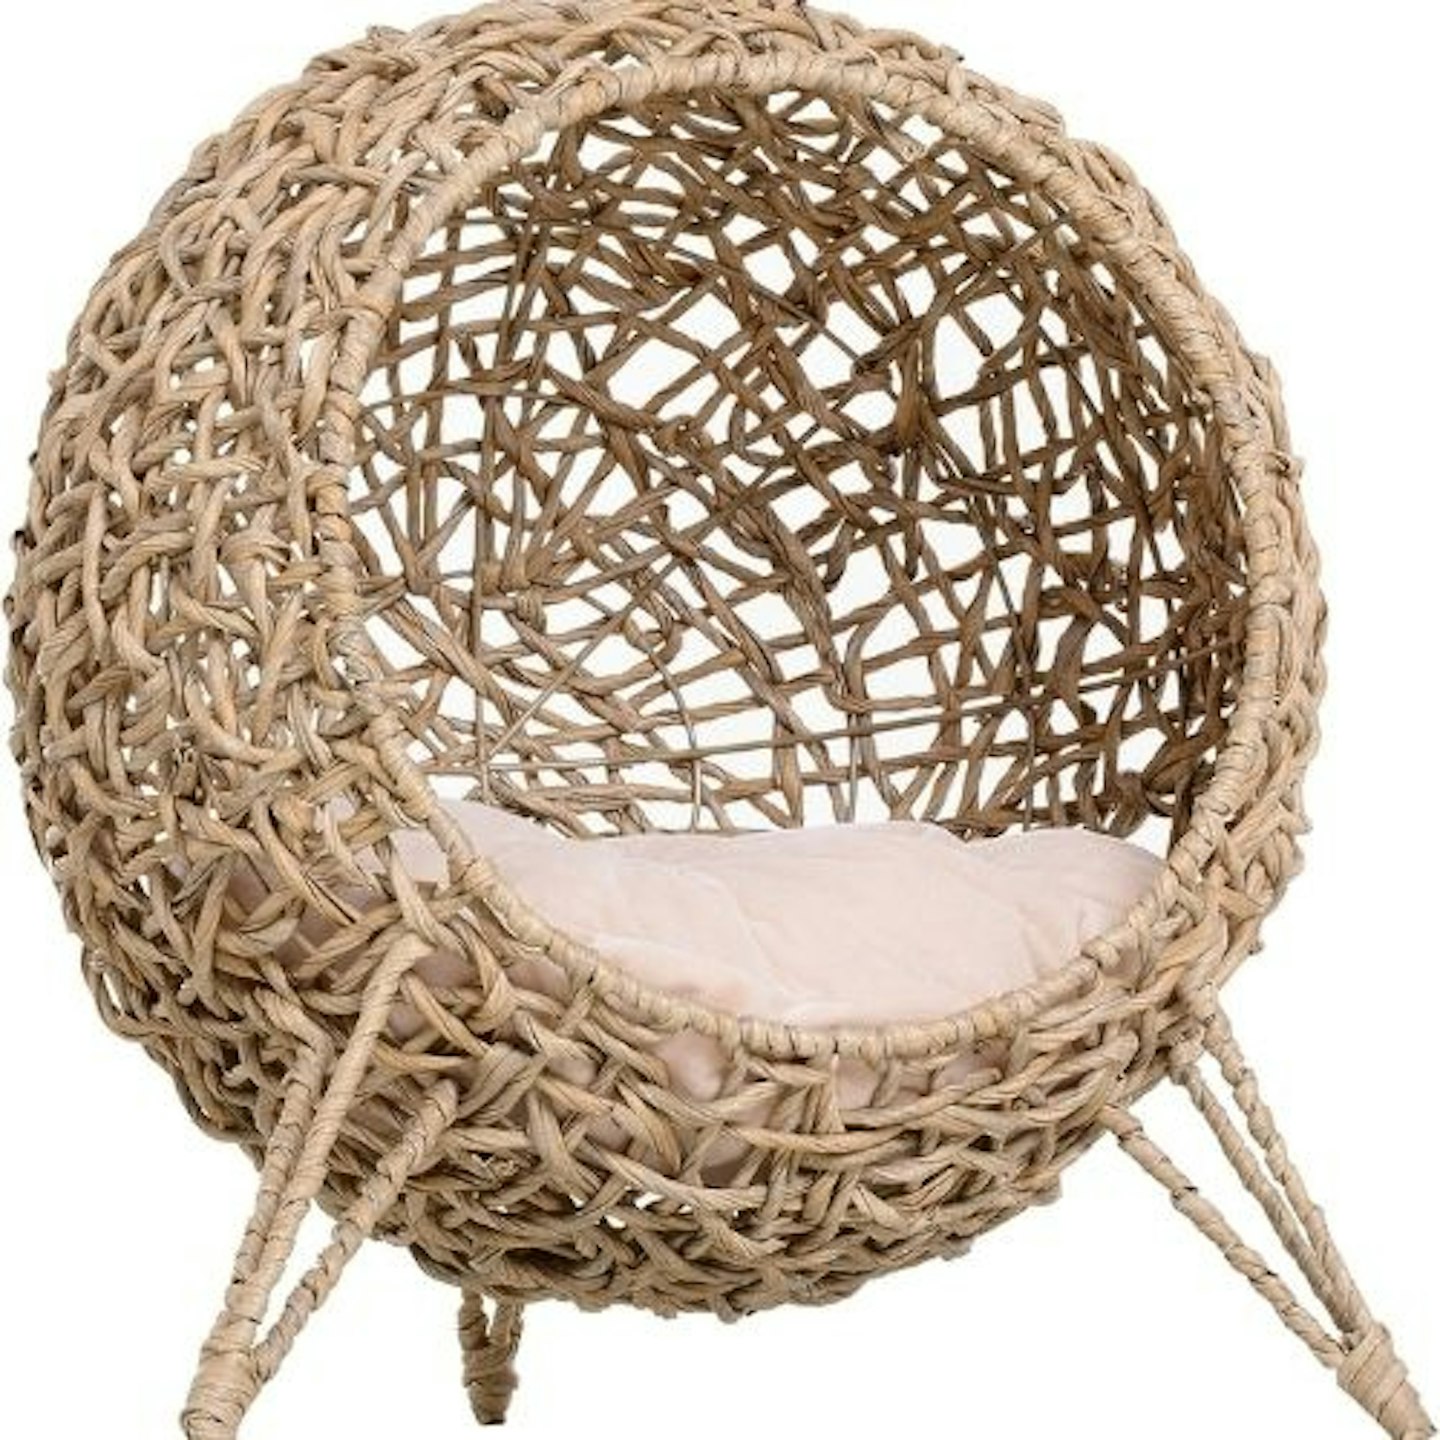 PawHut Wicker Cat House, Rattan Elevated Cat Bed with Three Tripod Legs, Ball-Shaped Cat Basket with Cushion - Natural Wood Finish